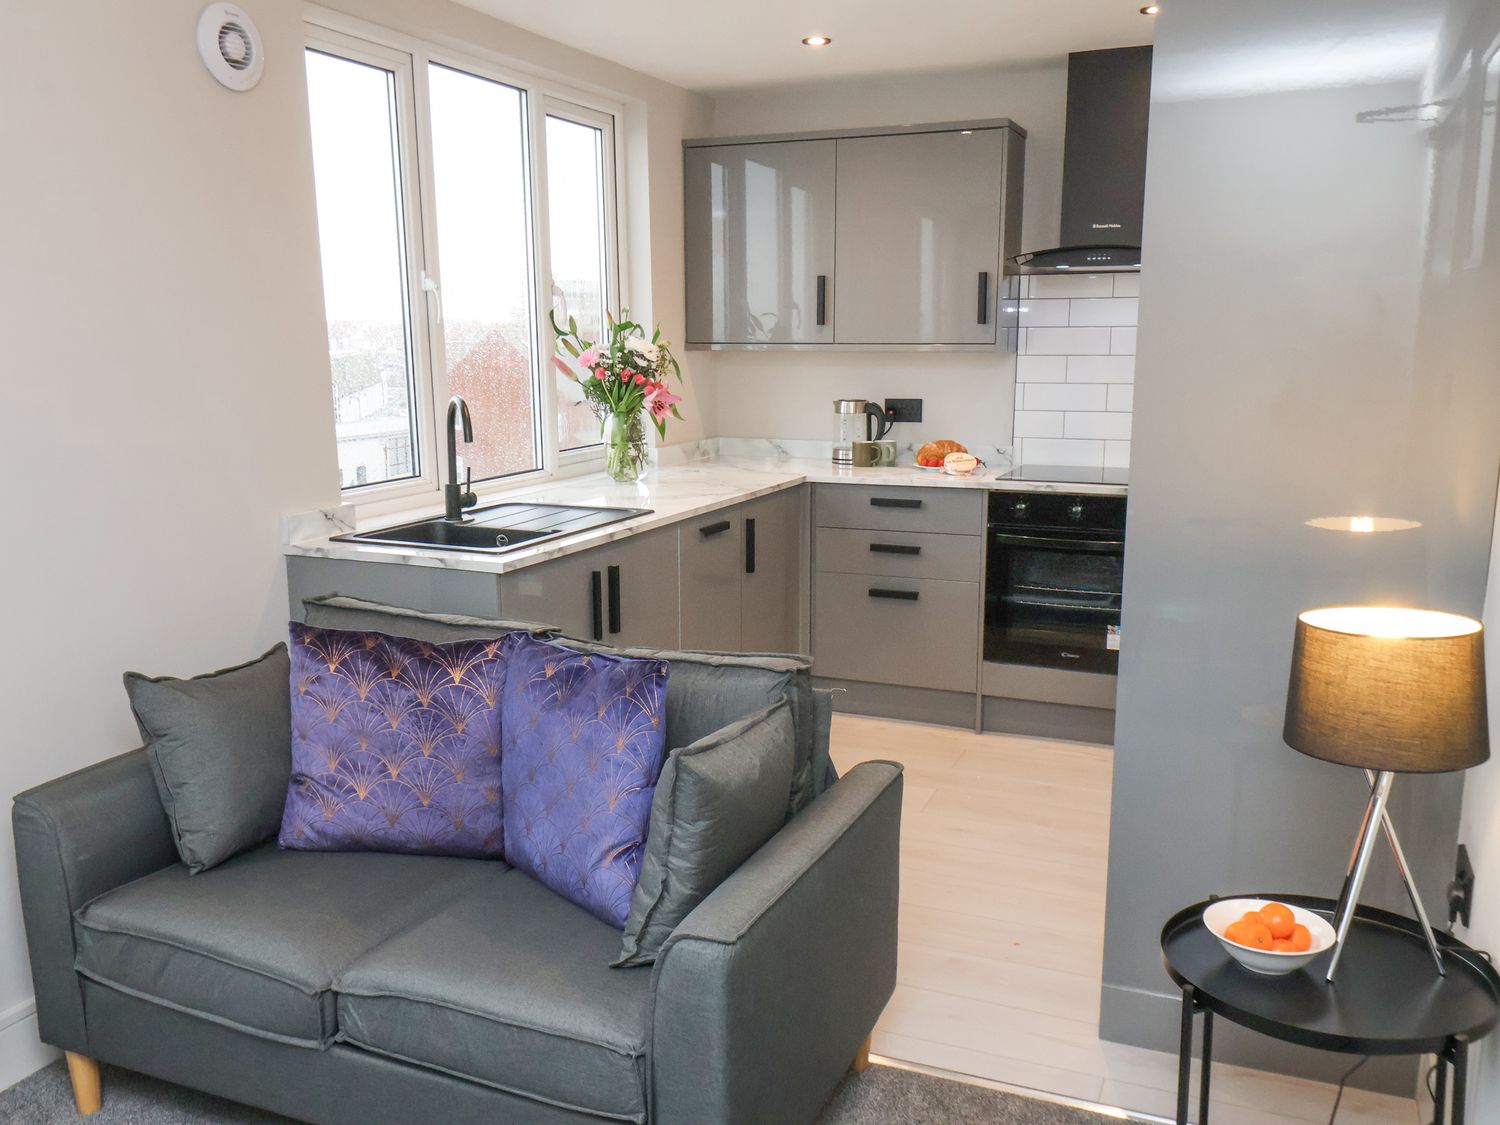 Apt 9 @ Hunter's Quay - North Yorkshire (incl. Whitby) - 1144479 - photo 1